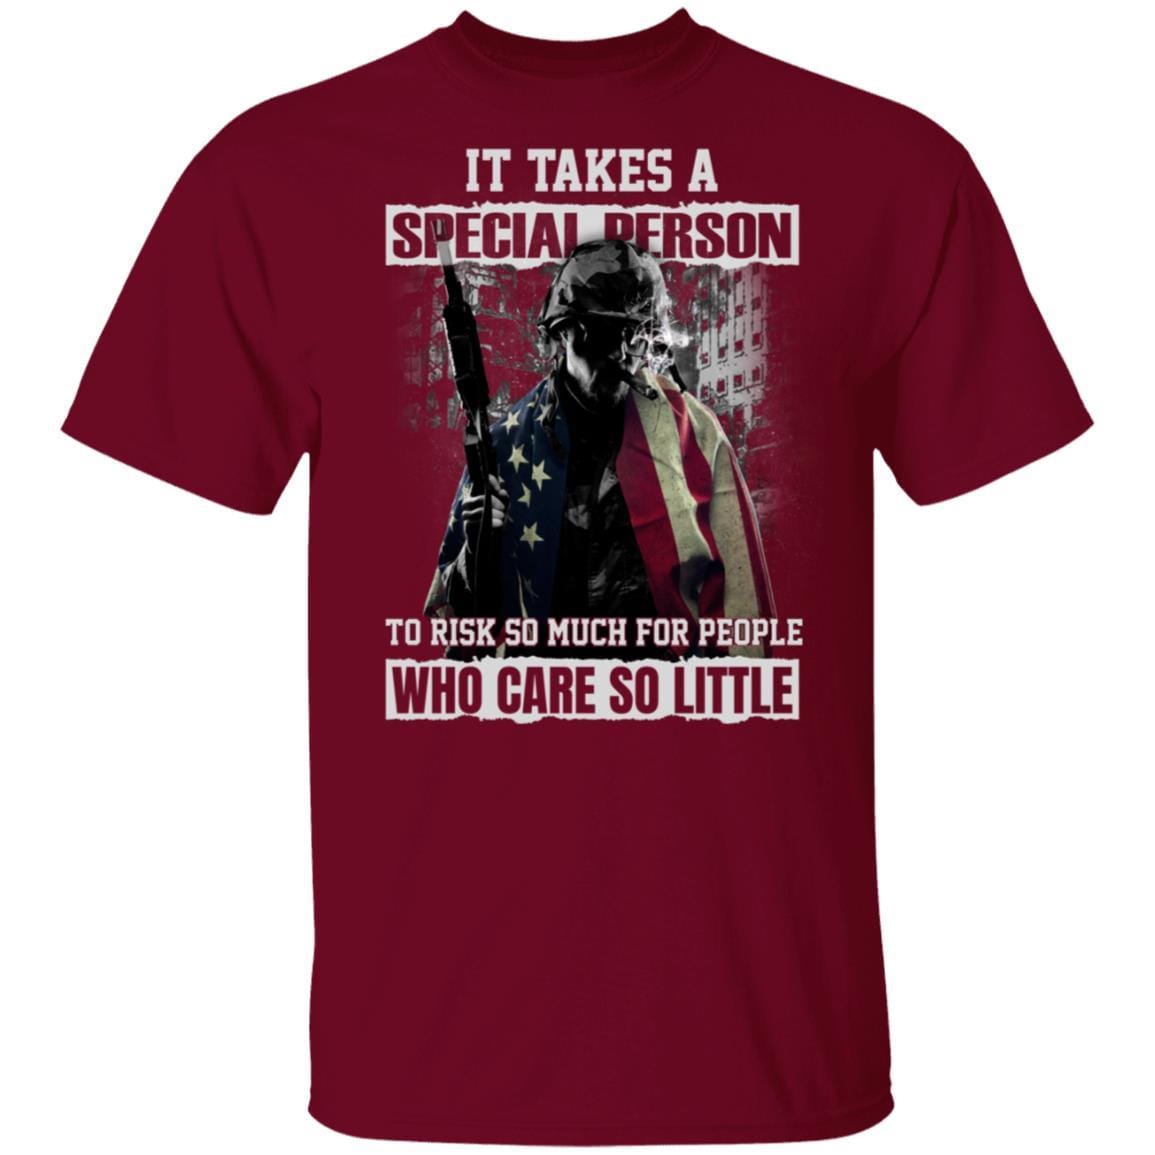 T-Shirt Takes A Specical Person - US Veteran On Front-T-Shirts-Veterans Nation